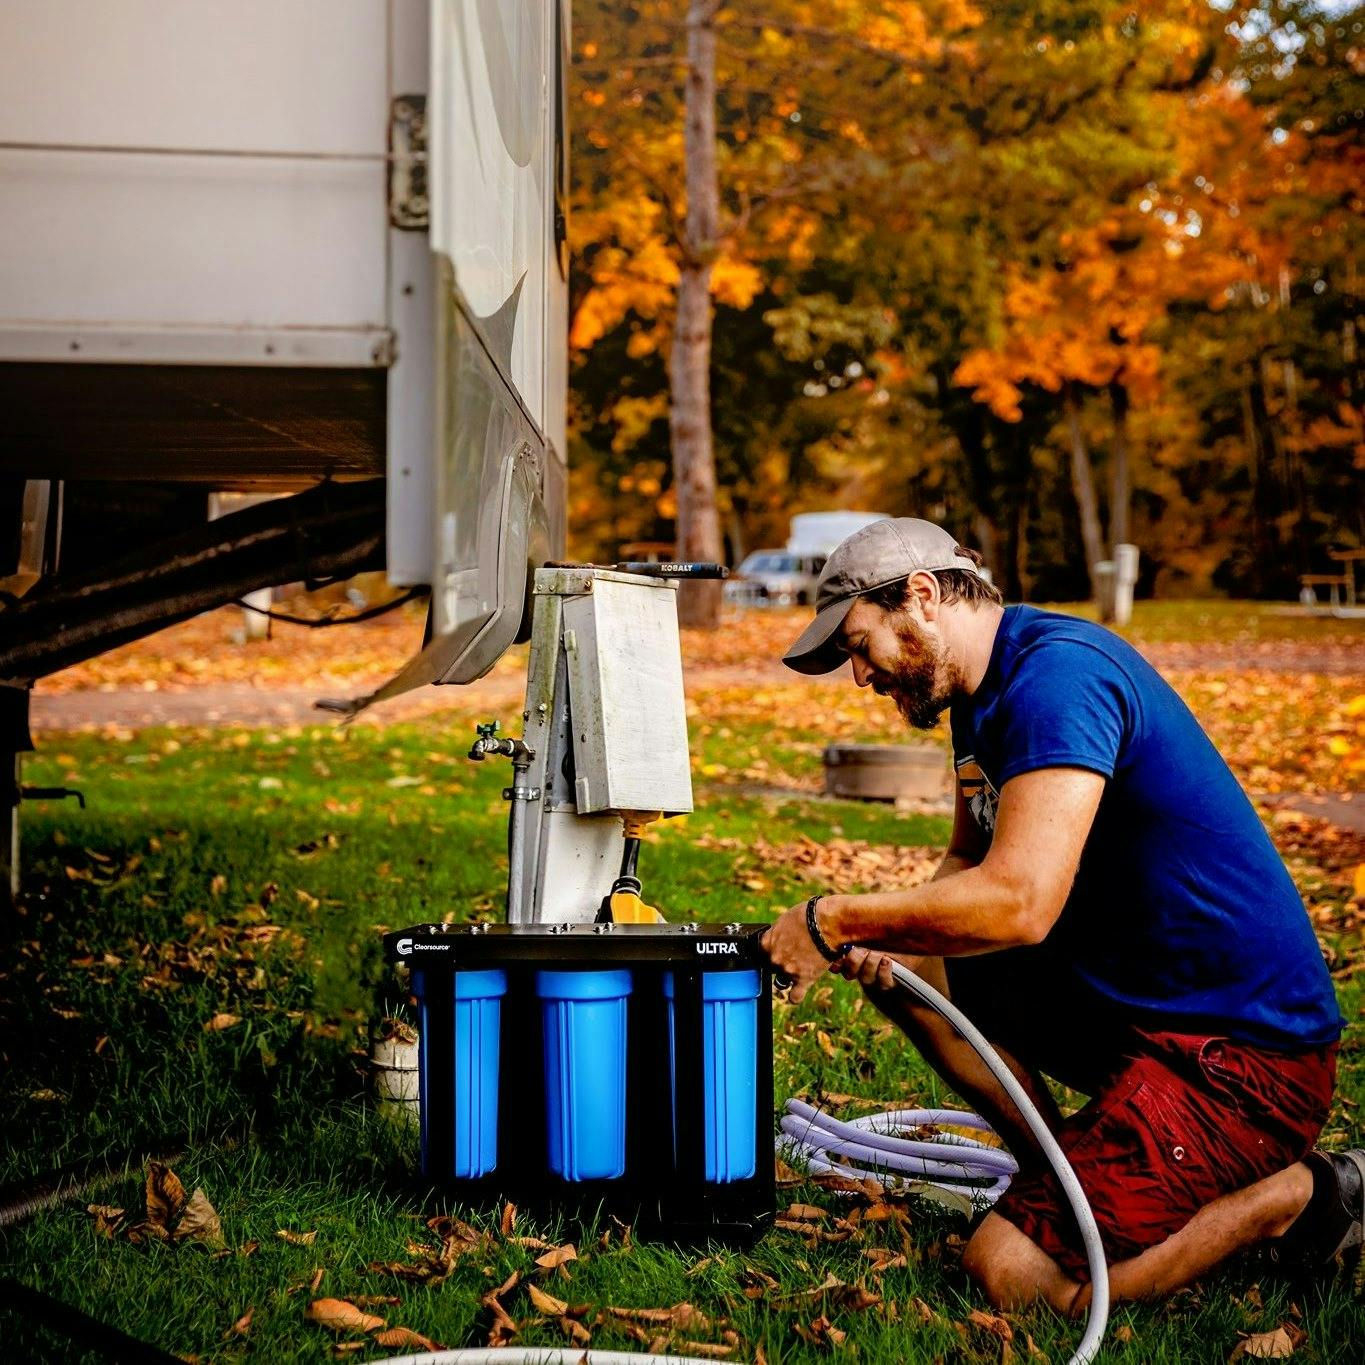 Josh Bailey setting up a water filter on his RV